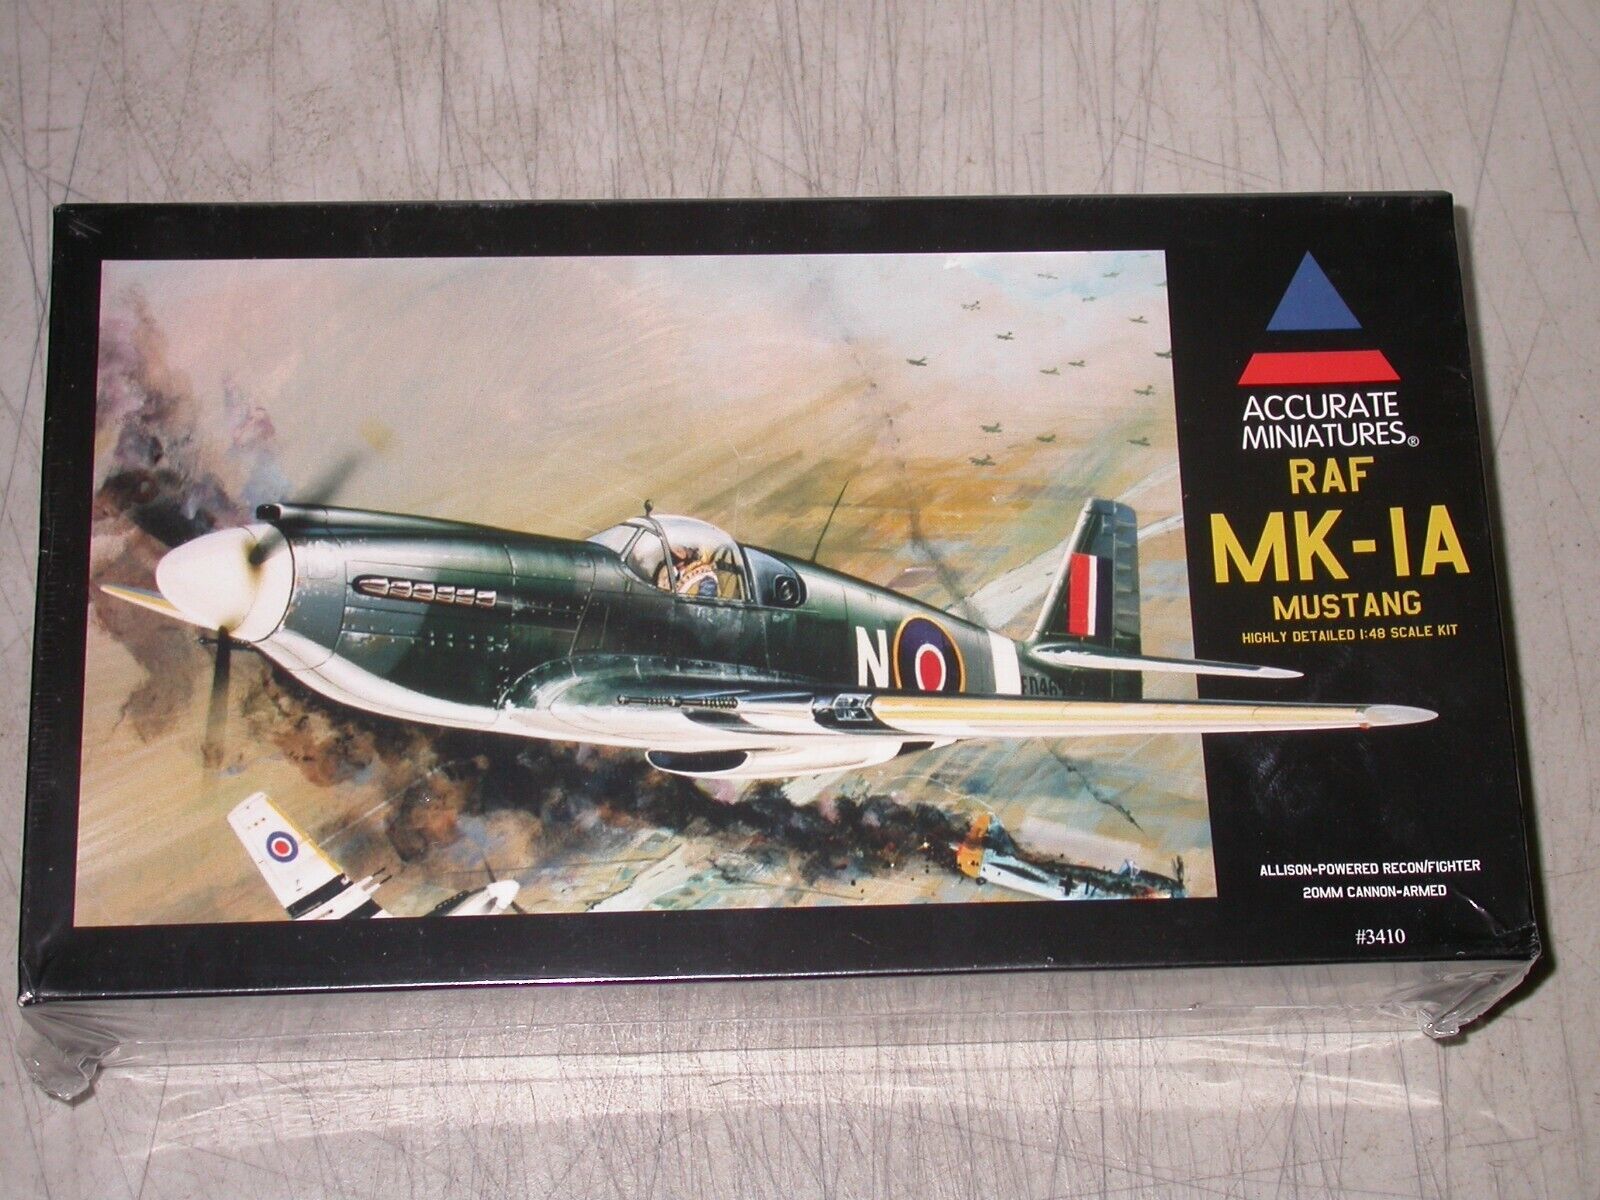 Accurate miniatures 3410 mustang MK-1A RAF 1/48 Military Aircraft  Model Kit New - $24.99